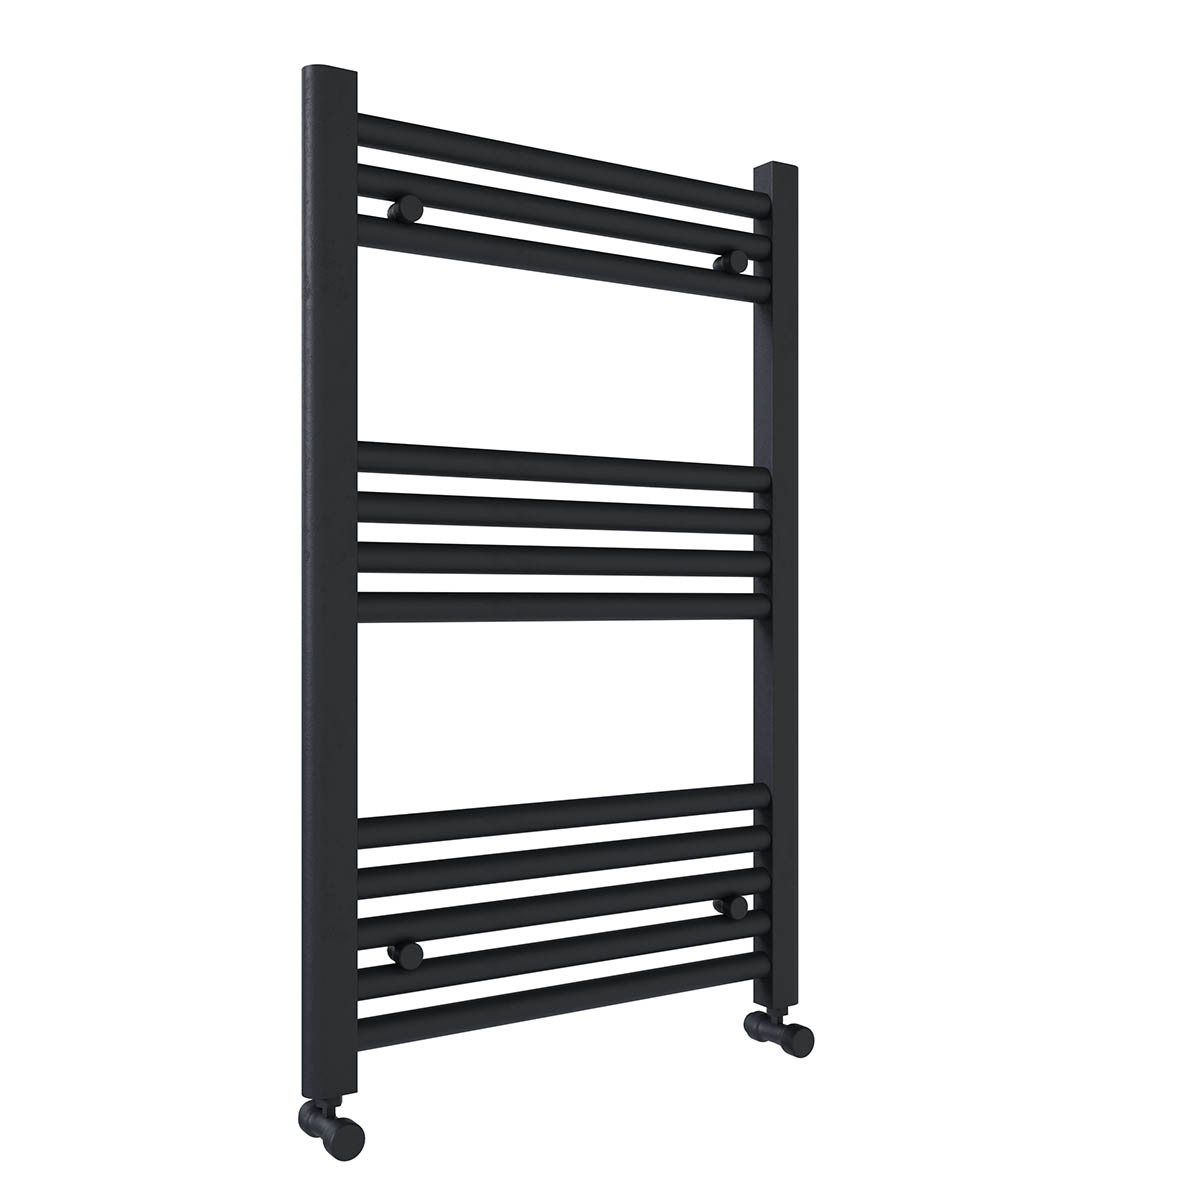 Roma Straight Heated Towel Rail - 800mm x 500mm - Anthracite (11054)